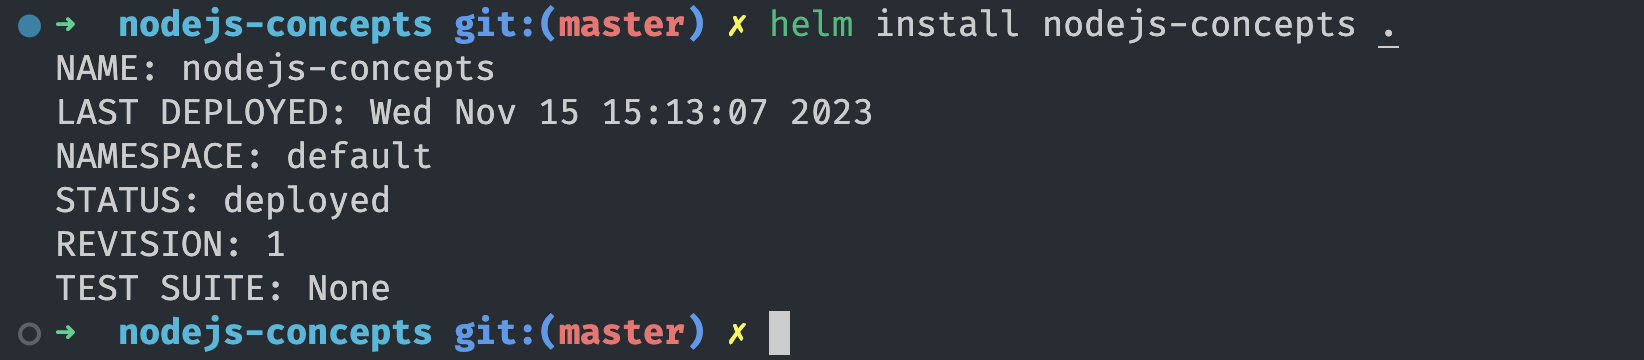 deploy-using-helm.png